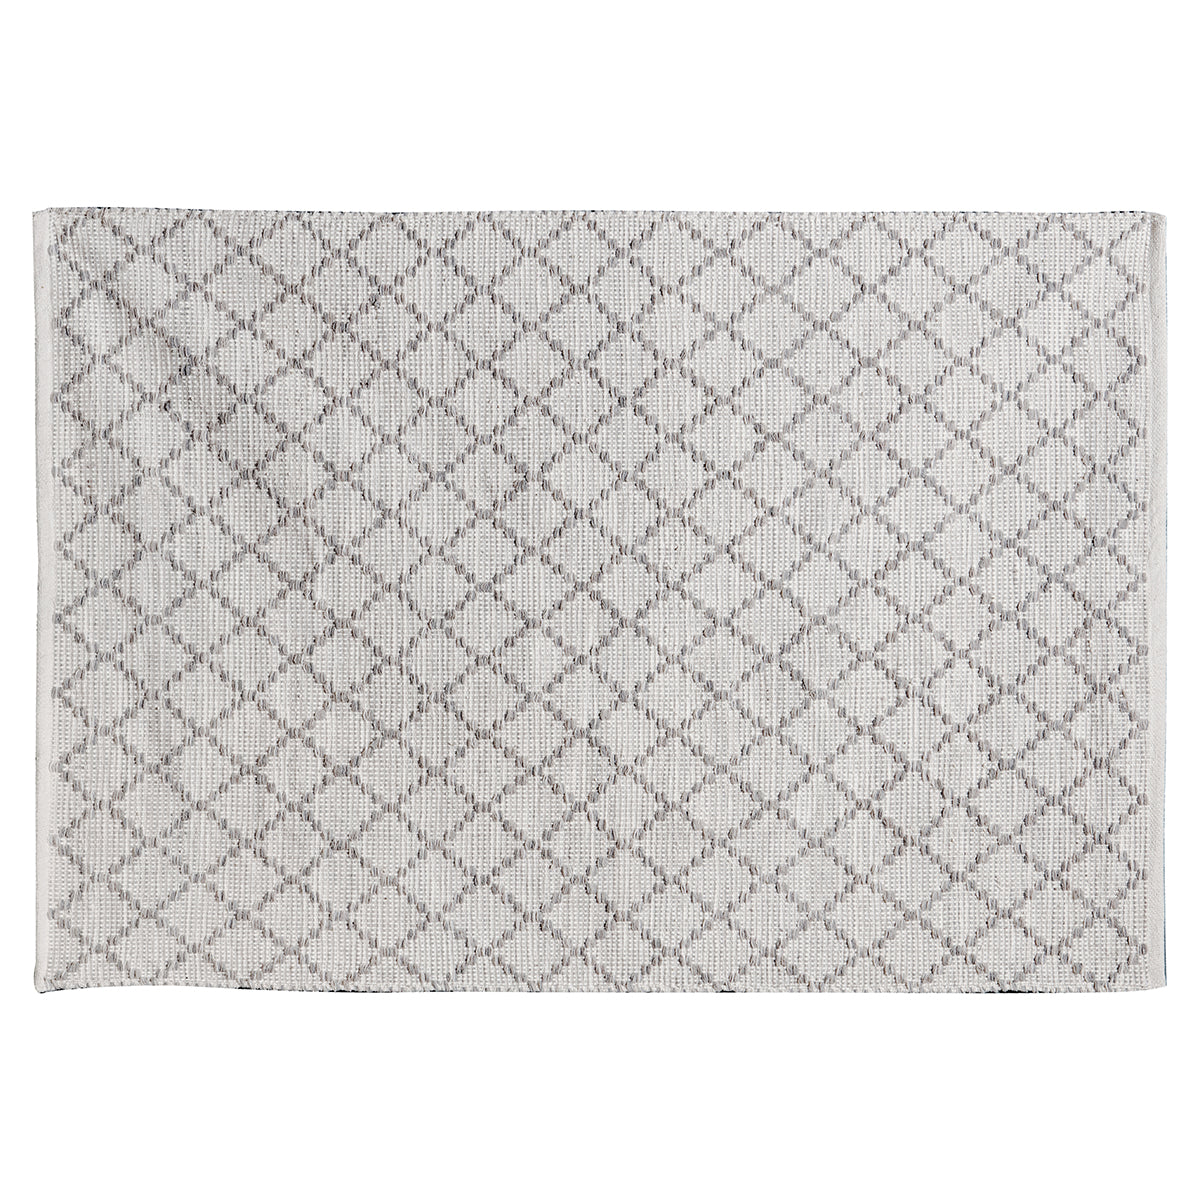 Load image into Gallery viewer, A white and gray Sullana Rug Grey 1600x2300mm with a geometric pattern perfect for interior decor.
